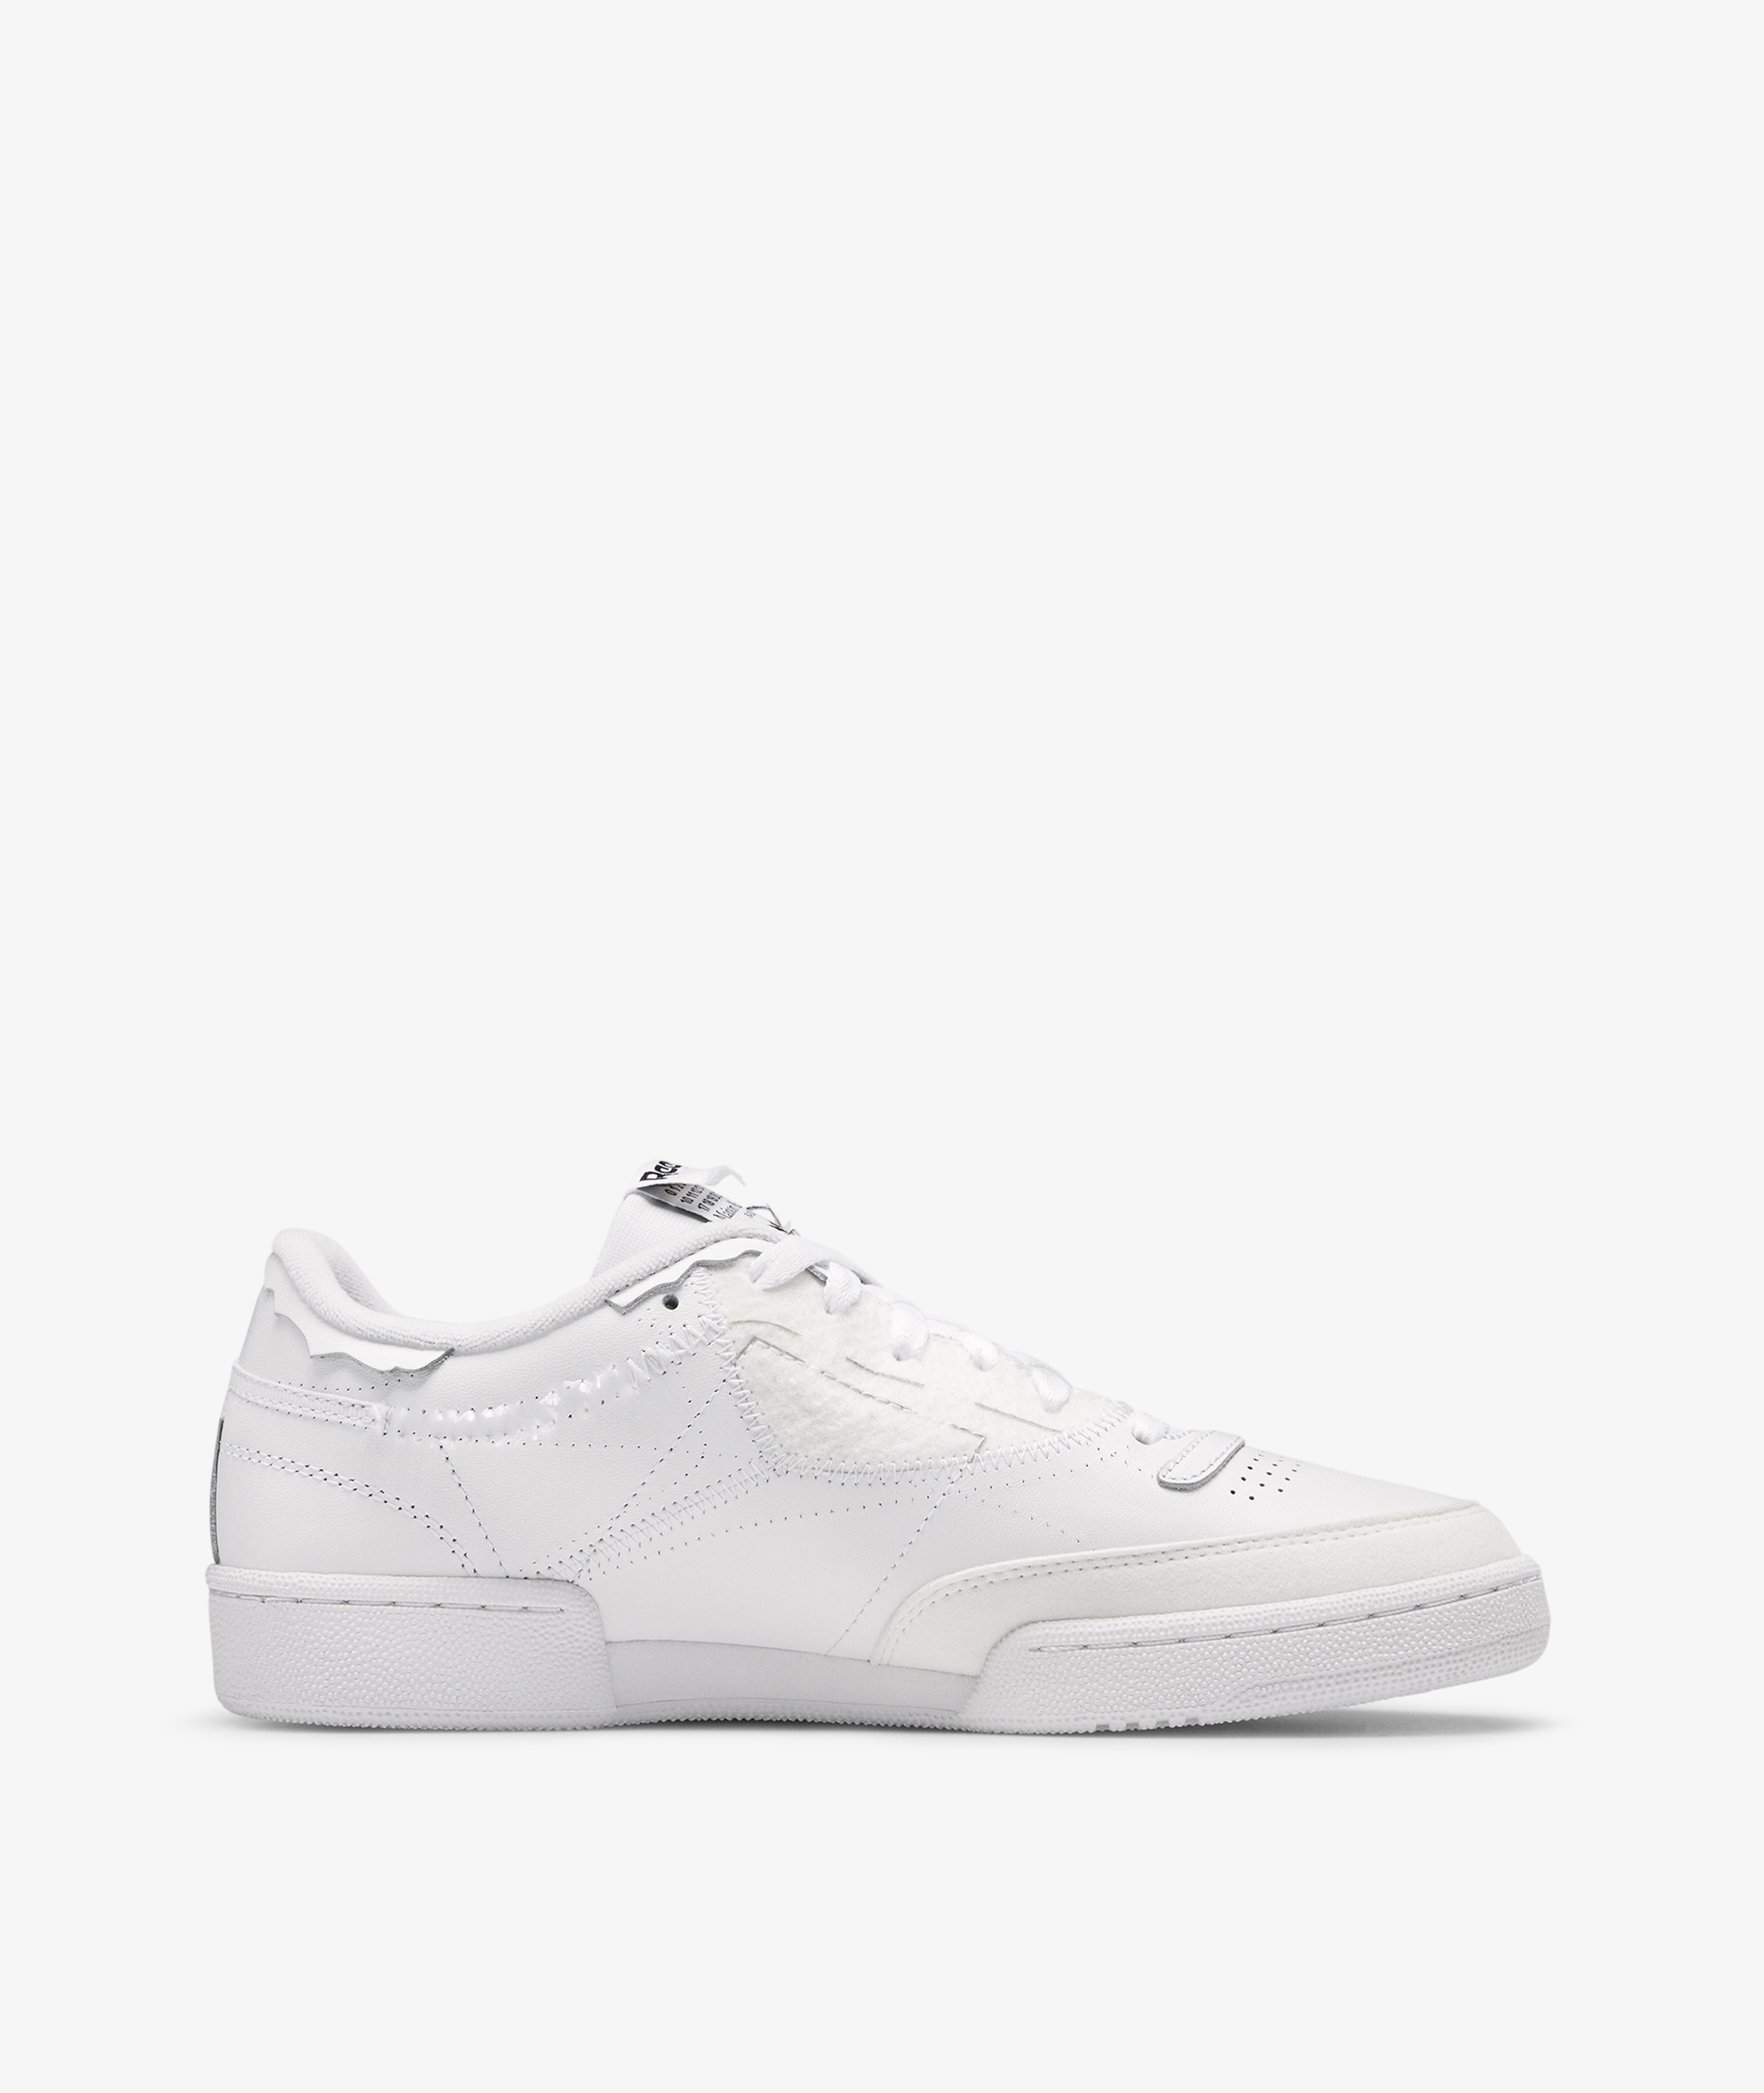 Norse Store | Shipping Worldwide - Reebok MM6 Project 0 CC MO - White